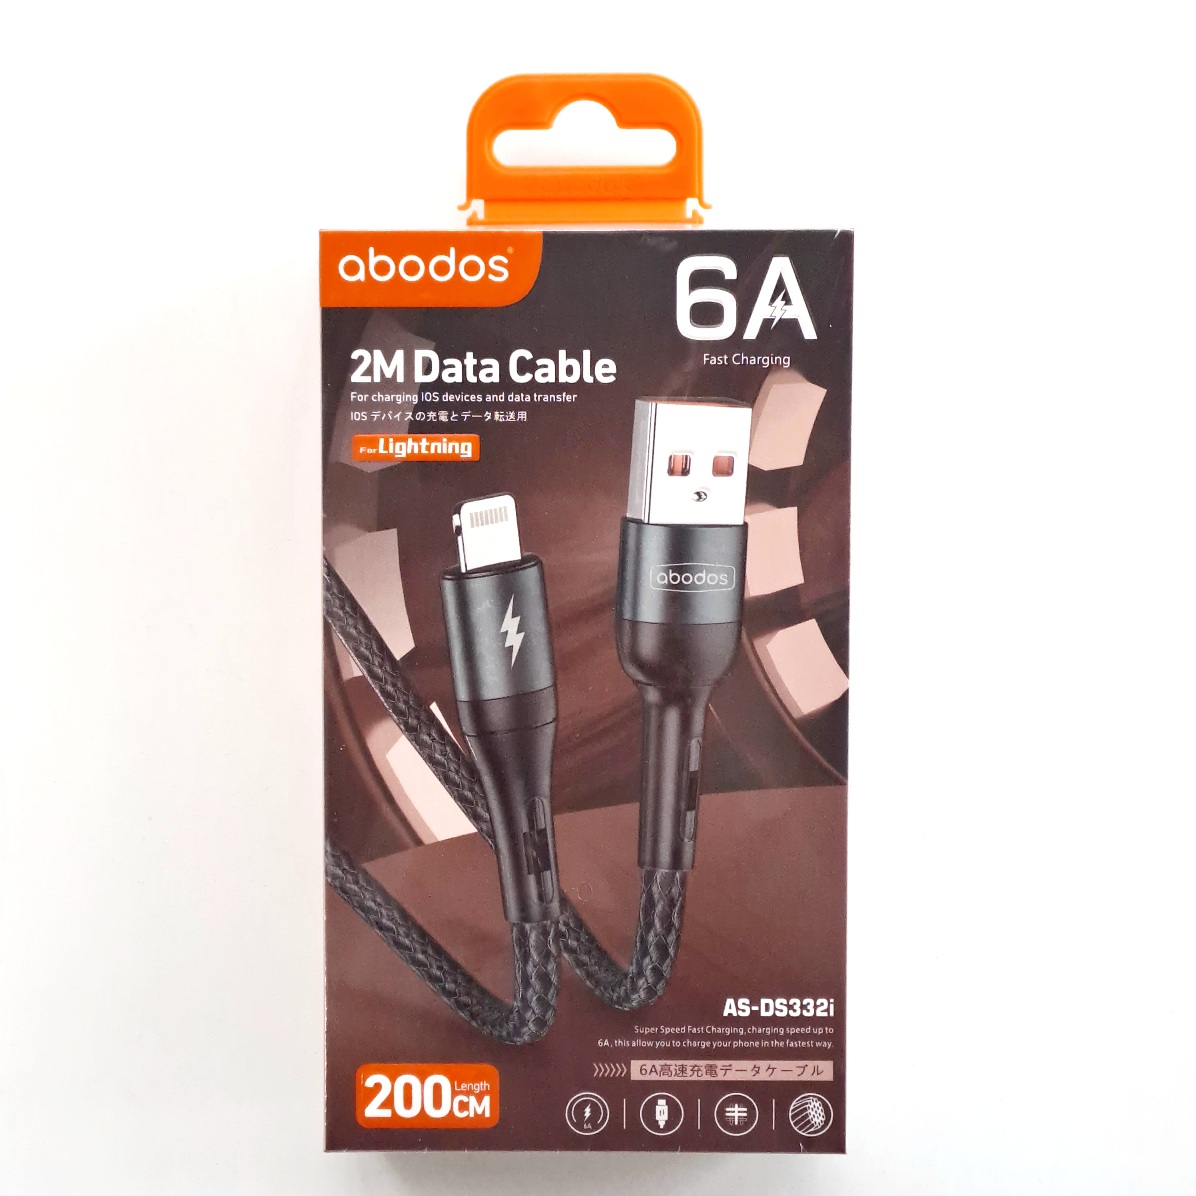 AS-DS332i abodos 6A USB to Lightning Data Cable 2m Black